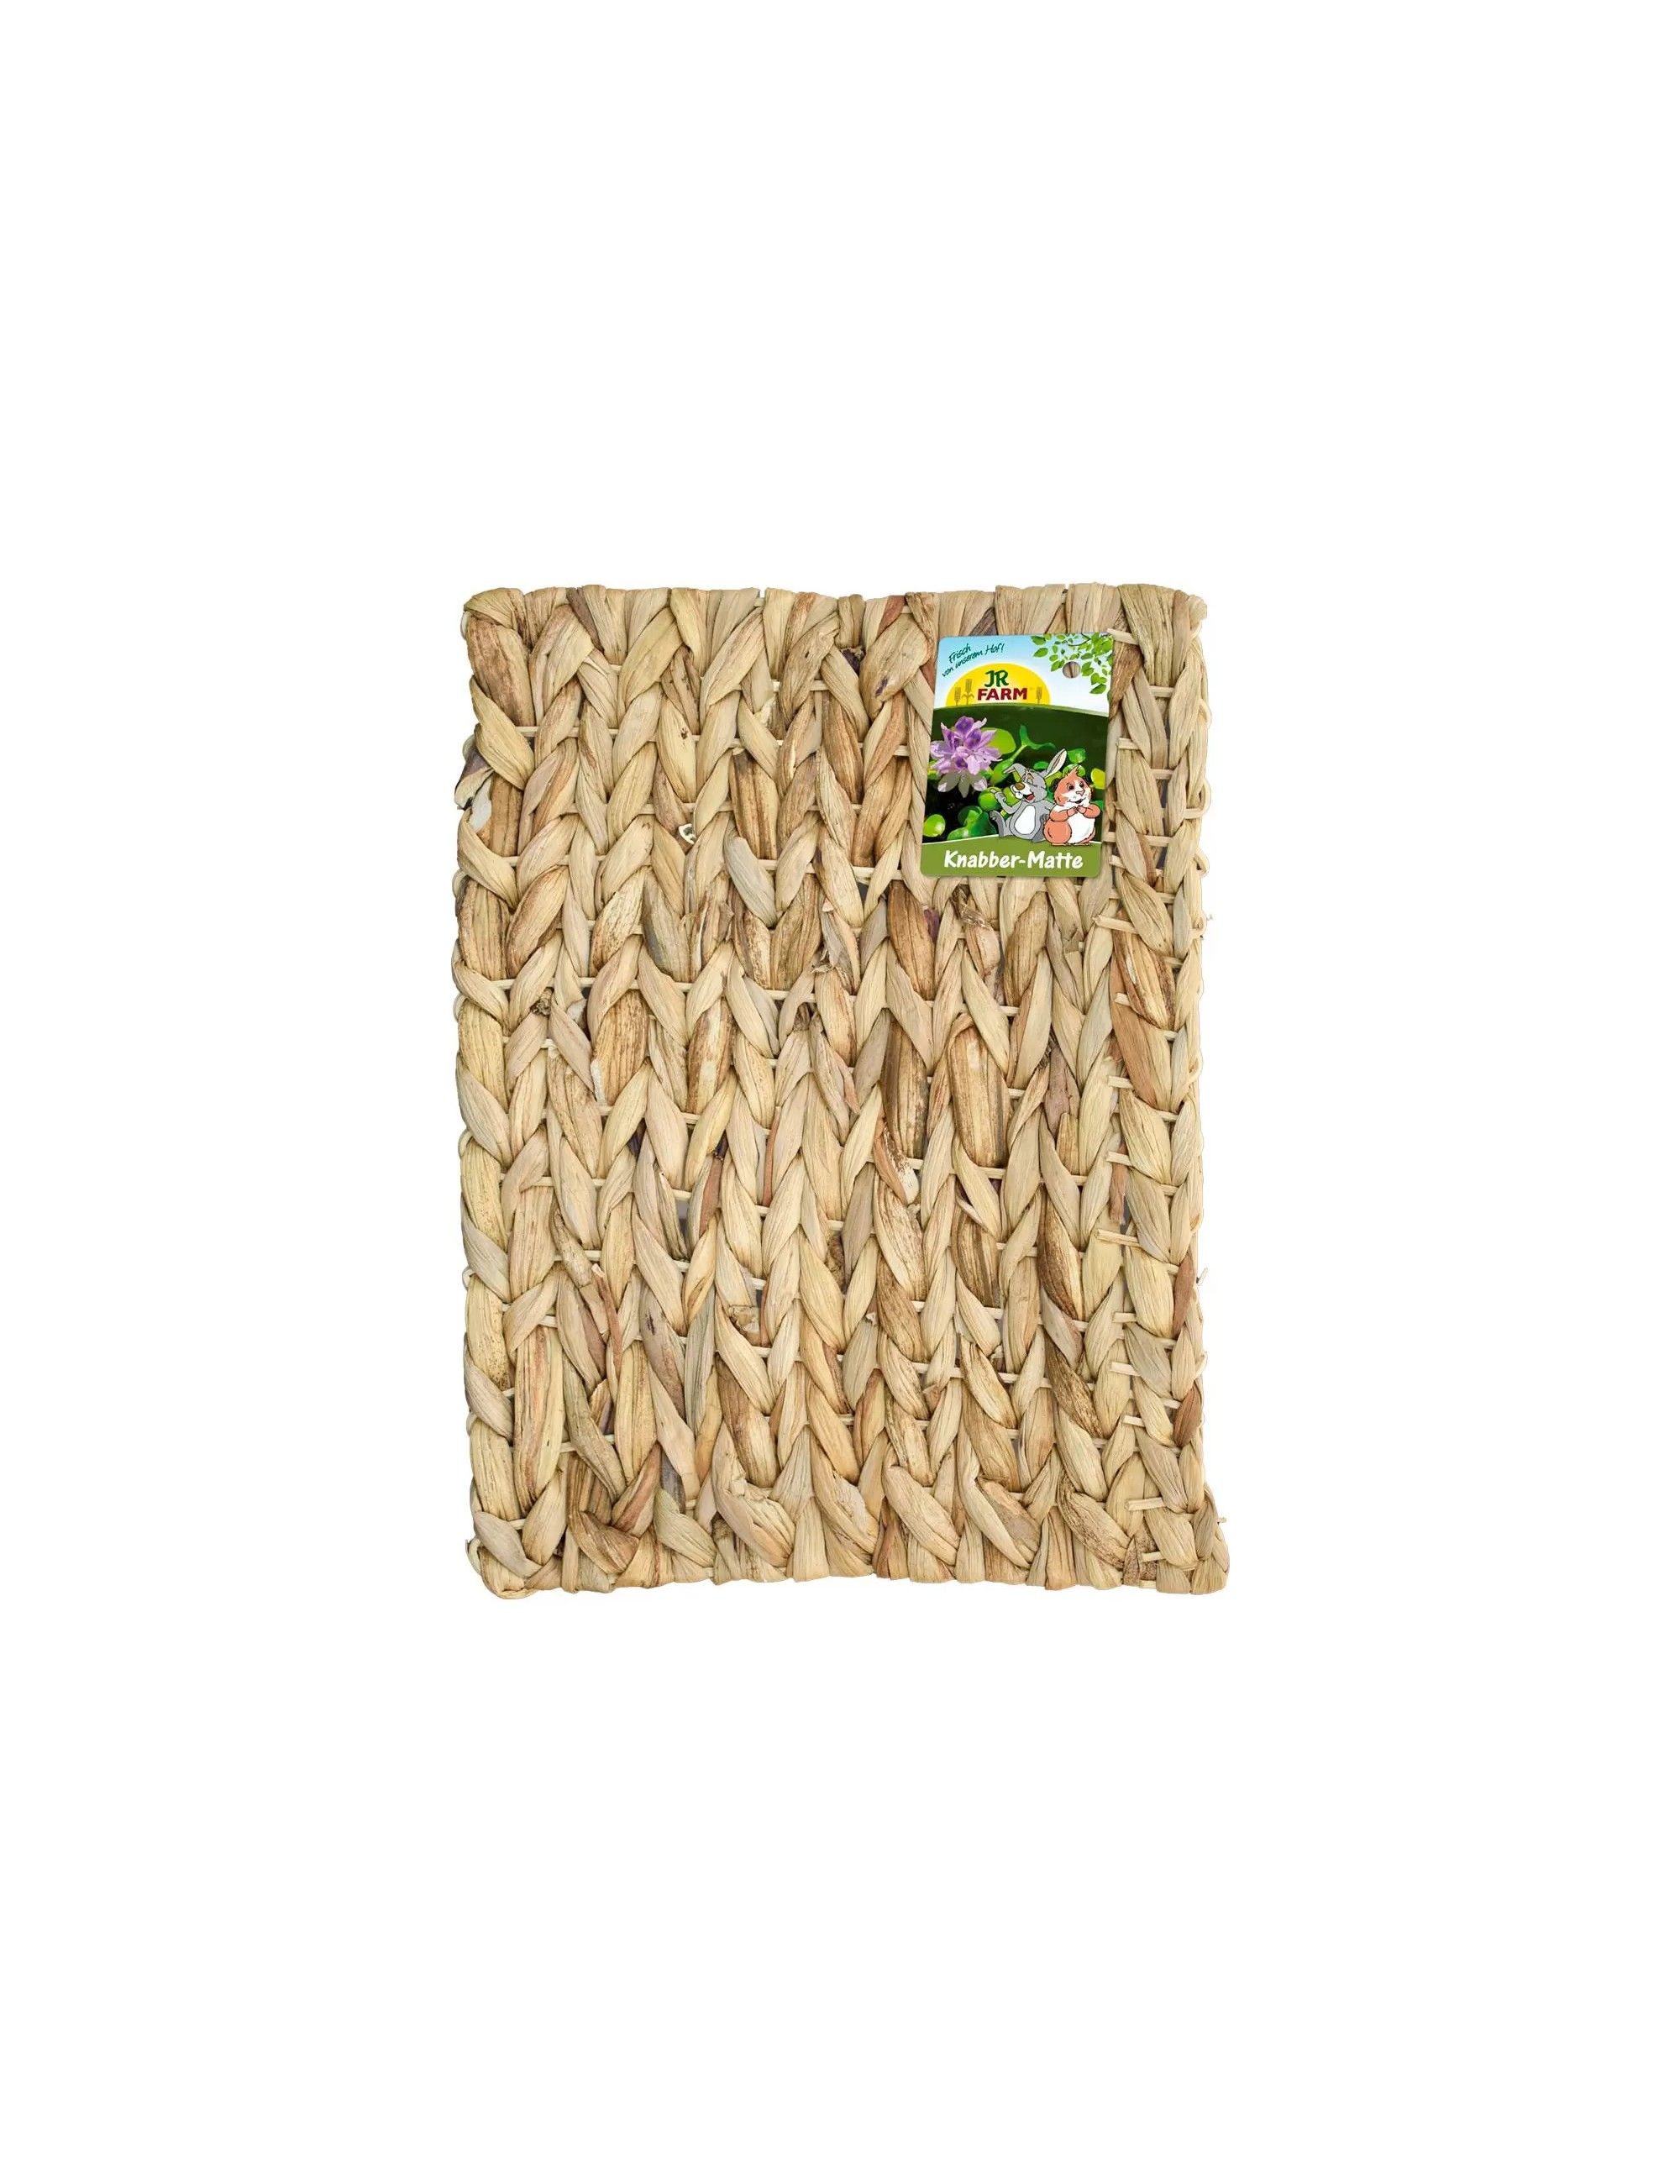 JR FARM - Braided Hyacinth Mat for rabbits and rodents